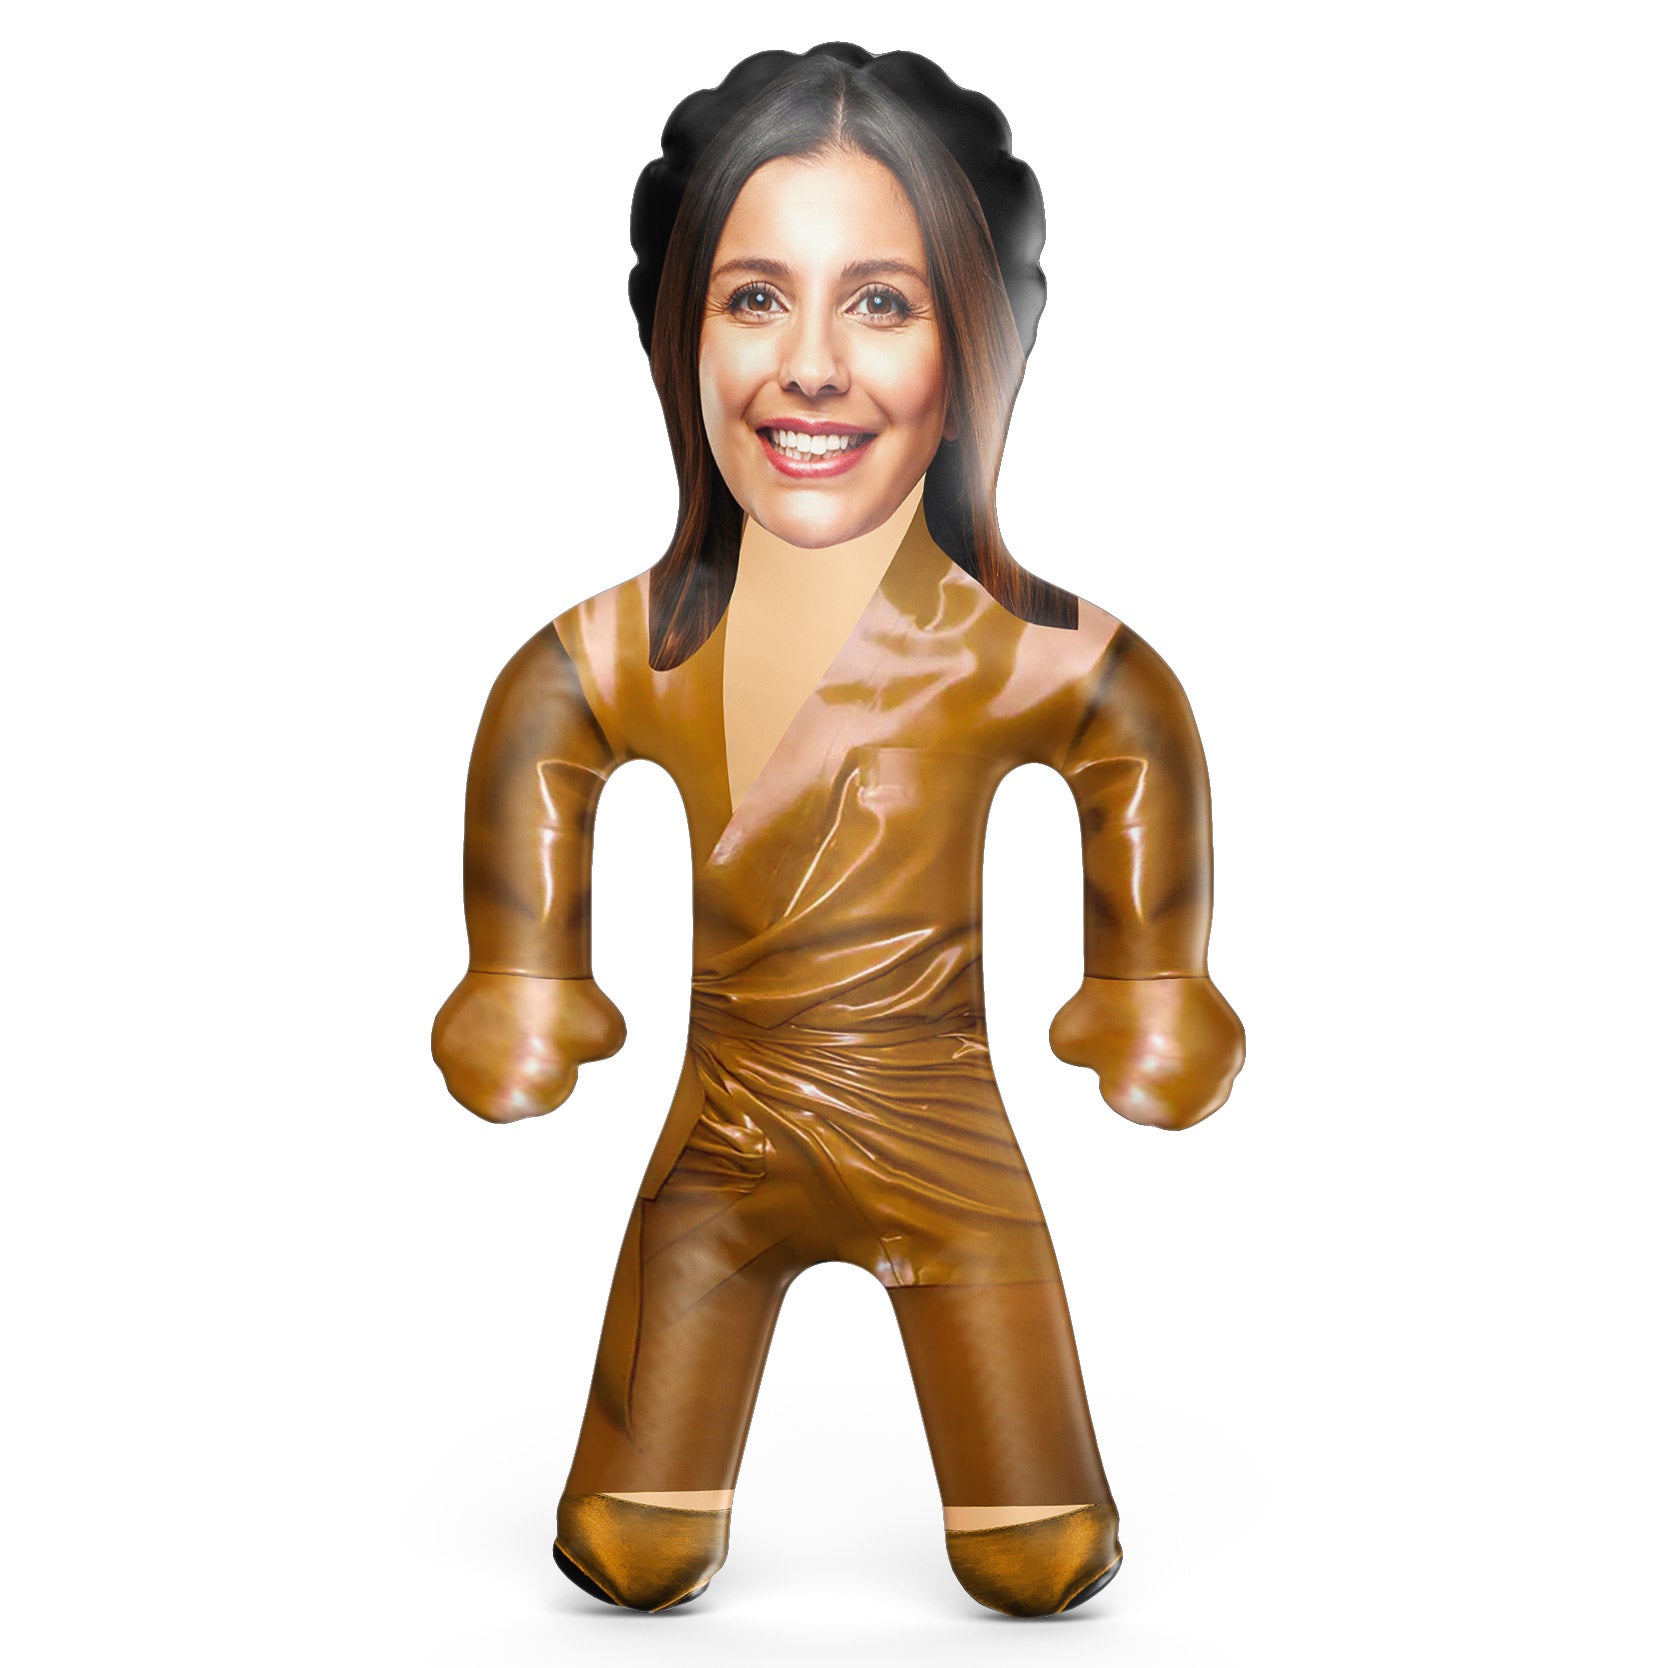 Influencer 3 Inflatable Doll - Influencer Blow Up Doll